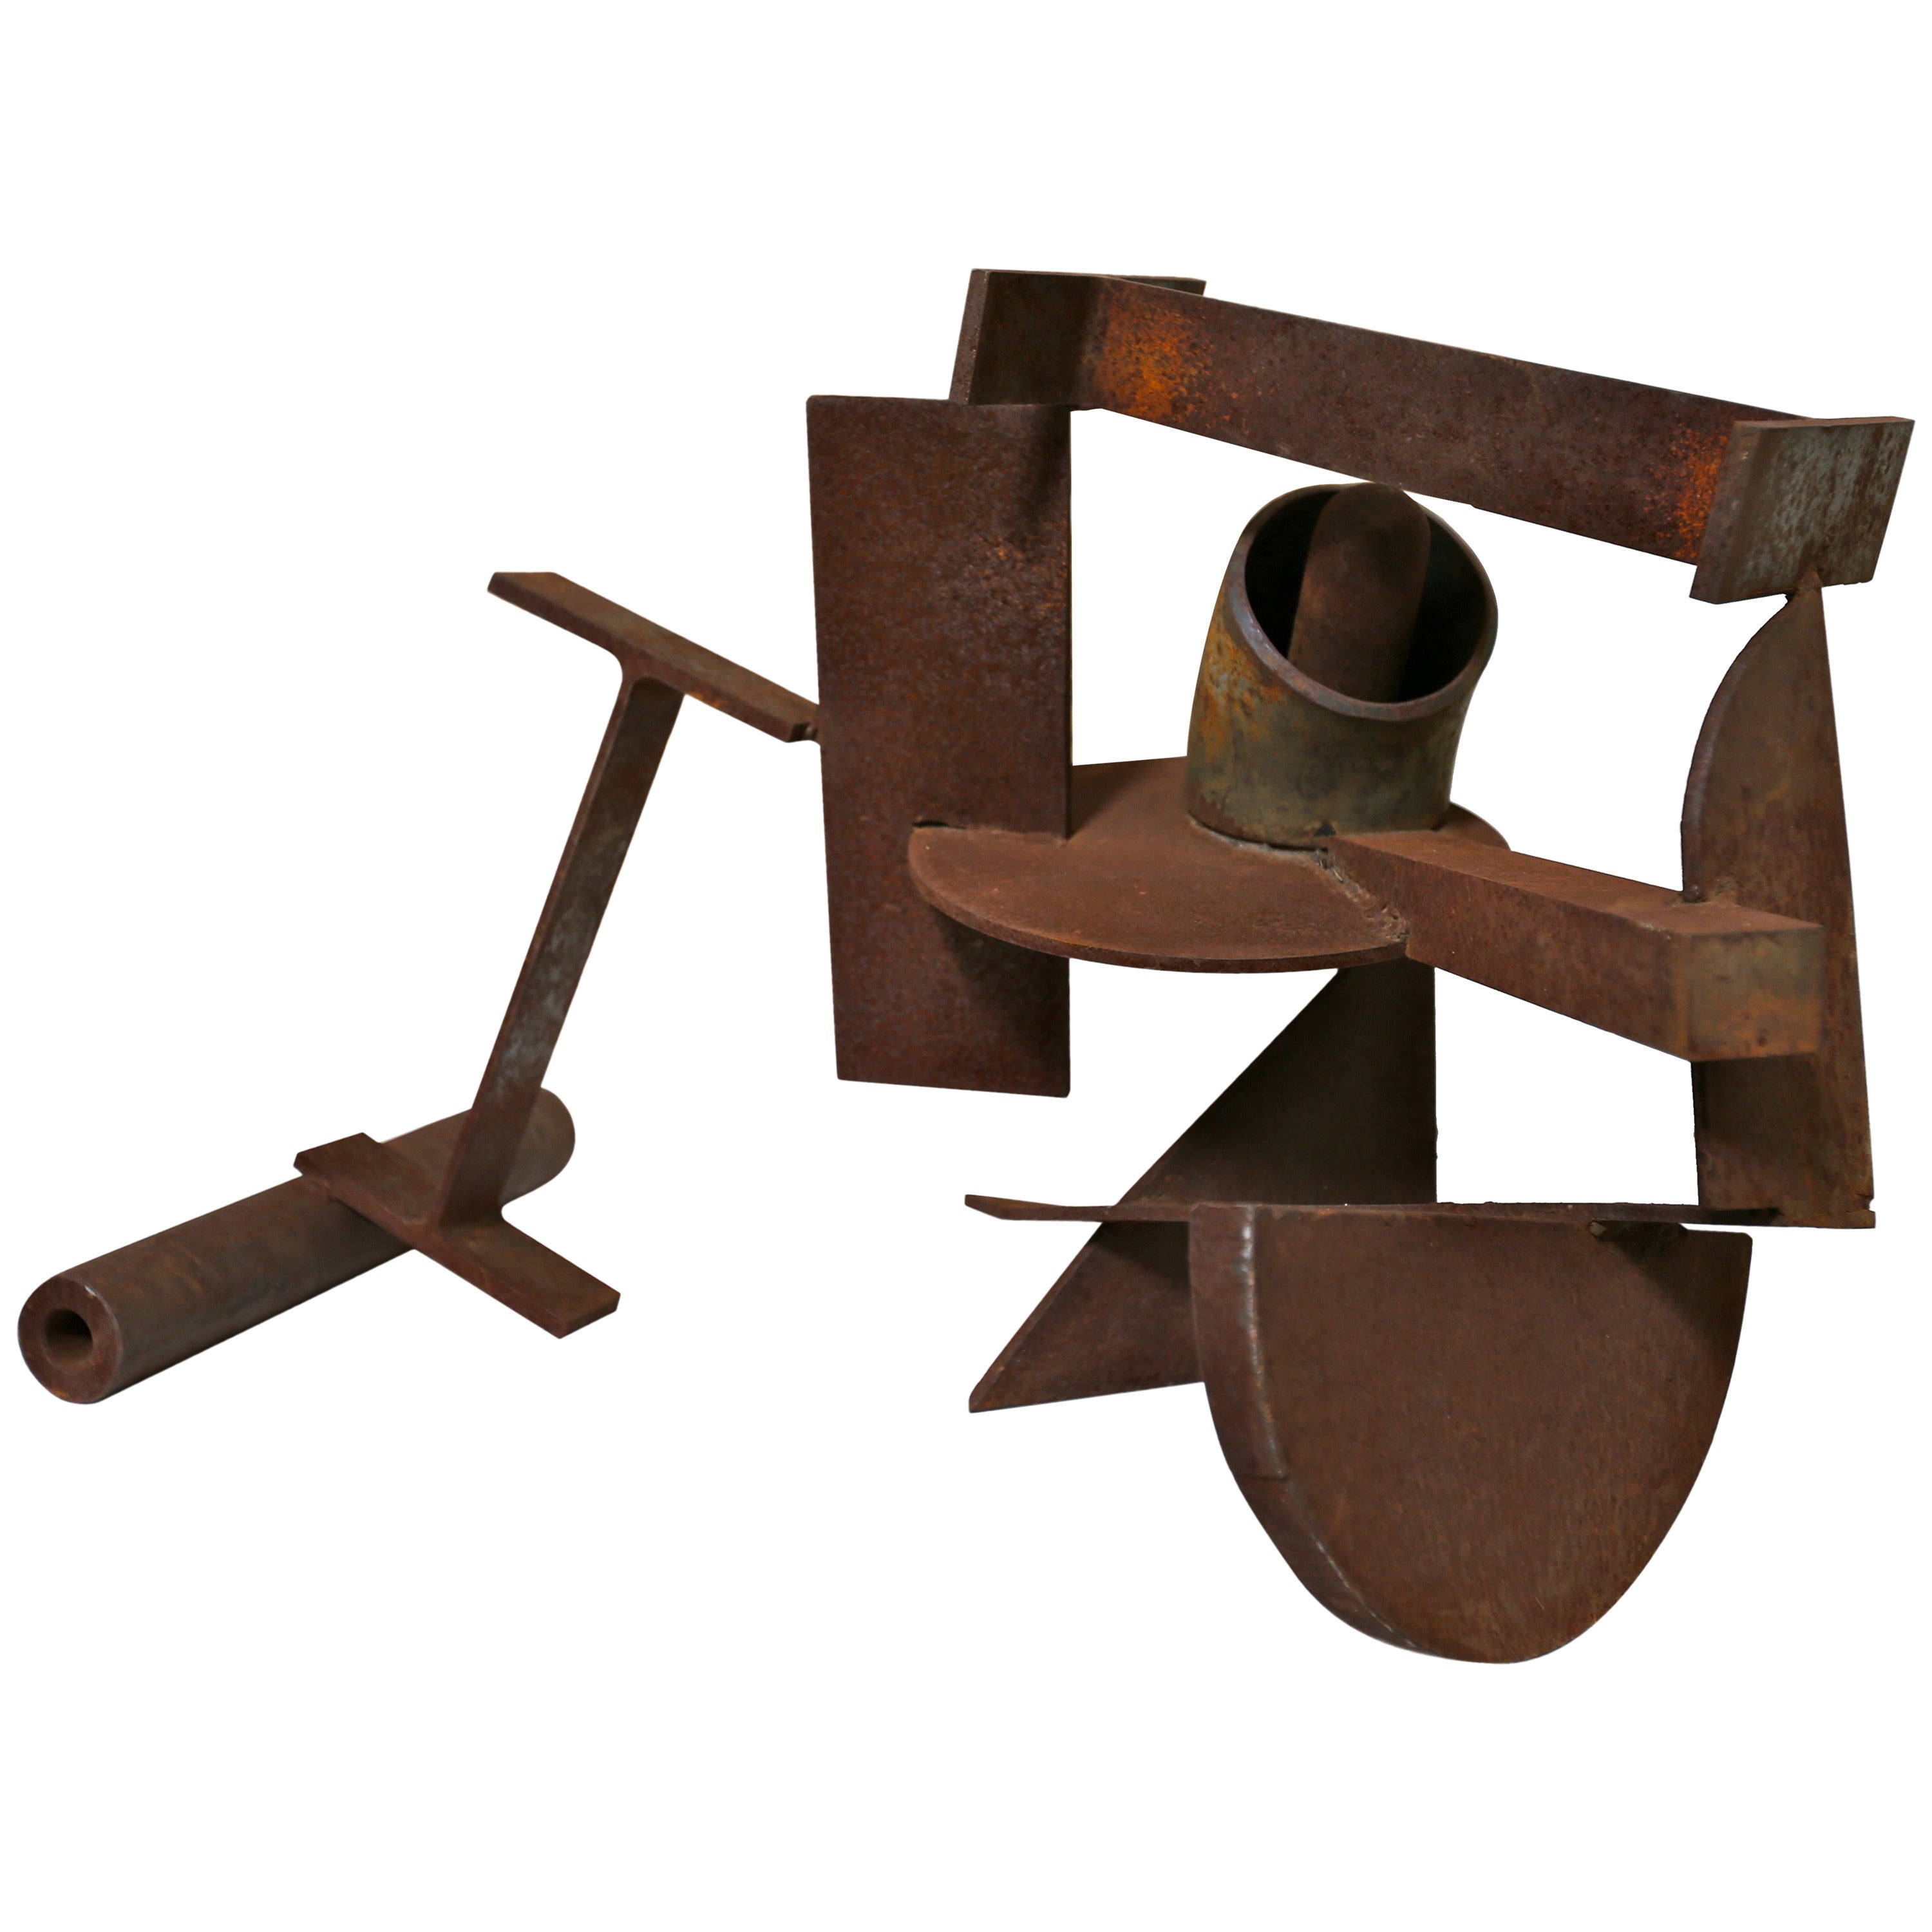 Abstract Steel Patinated Sculpture by Kim Nelson